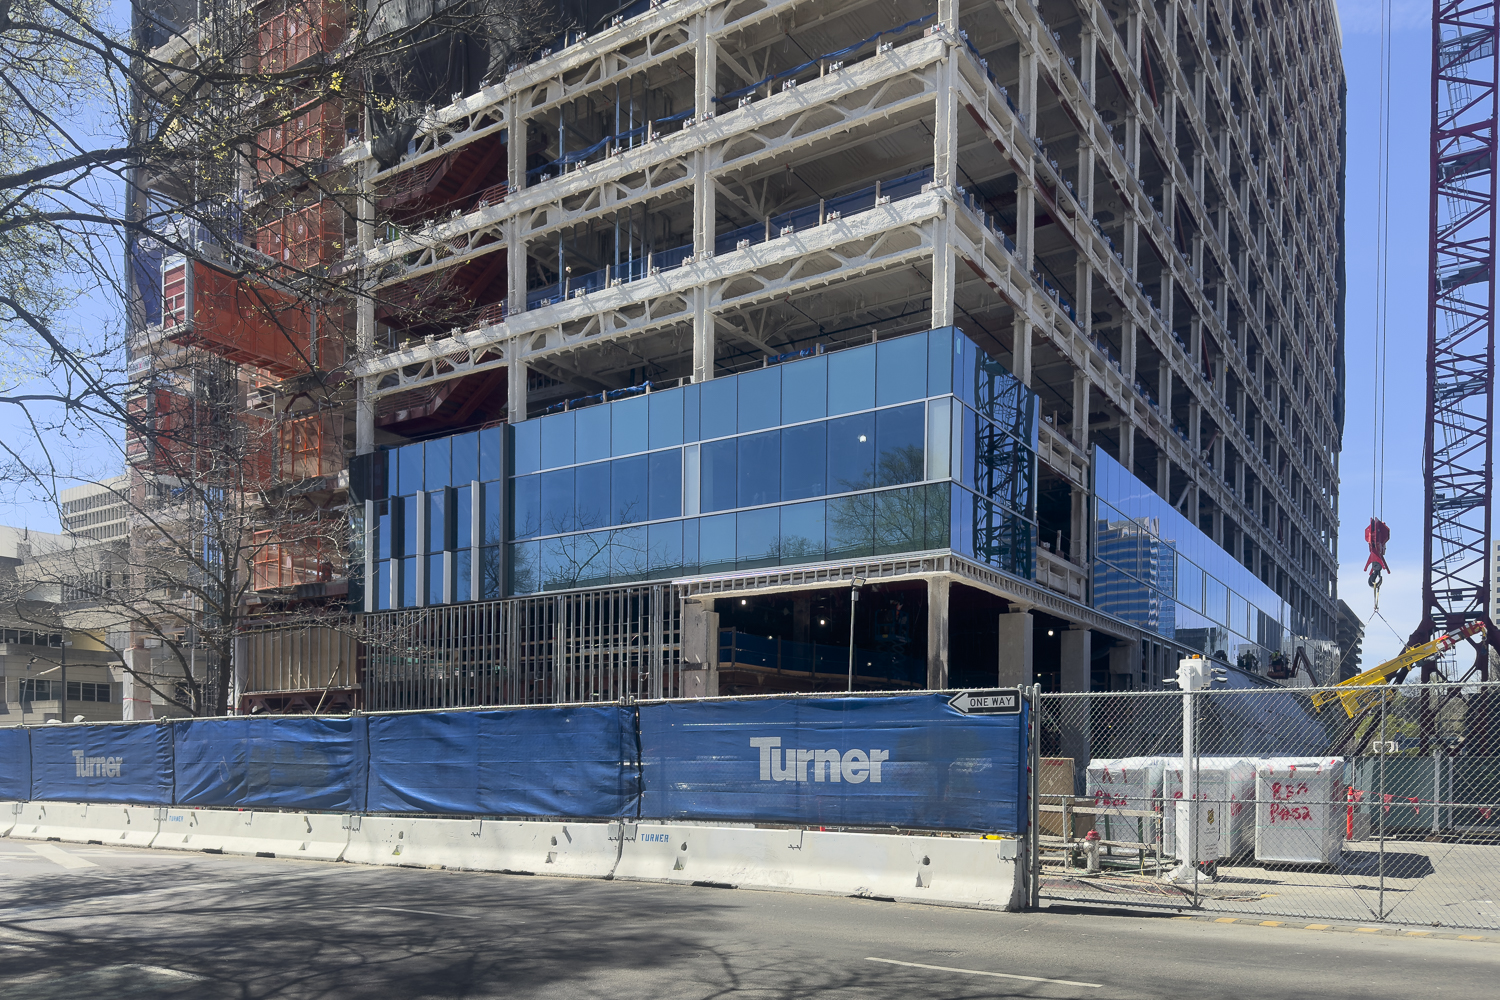 DGS Resources Building facade installation rising over 9th Street, image by author